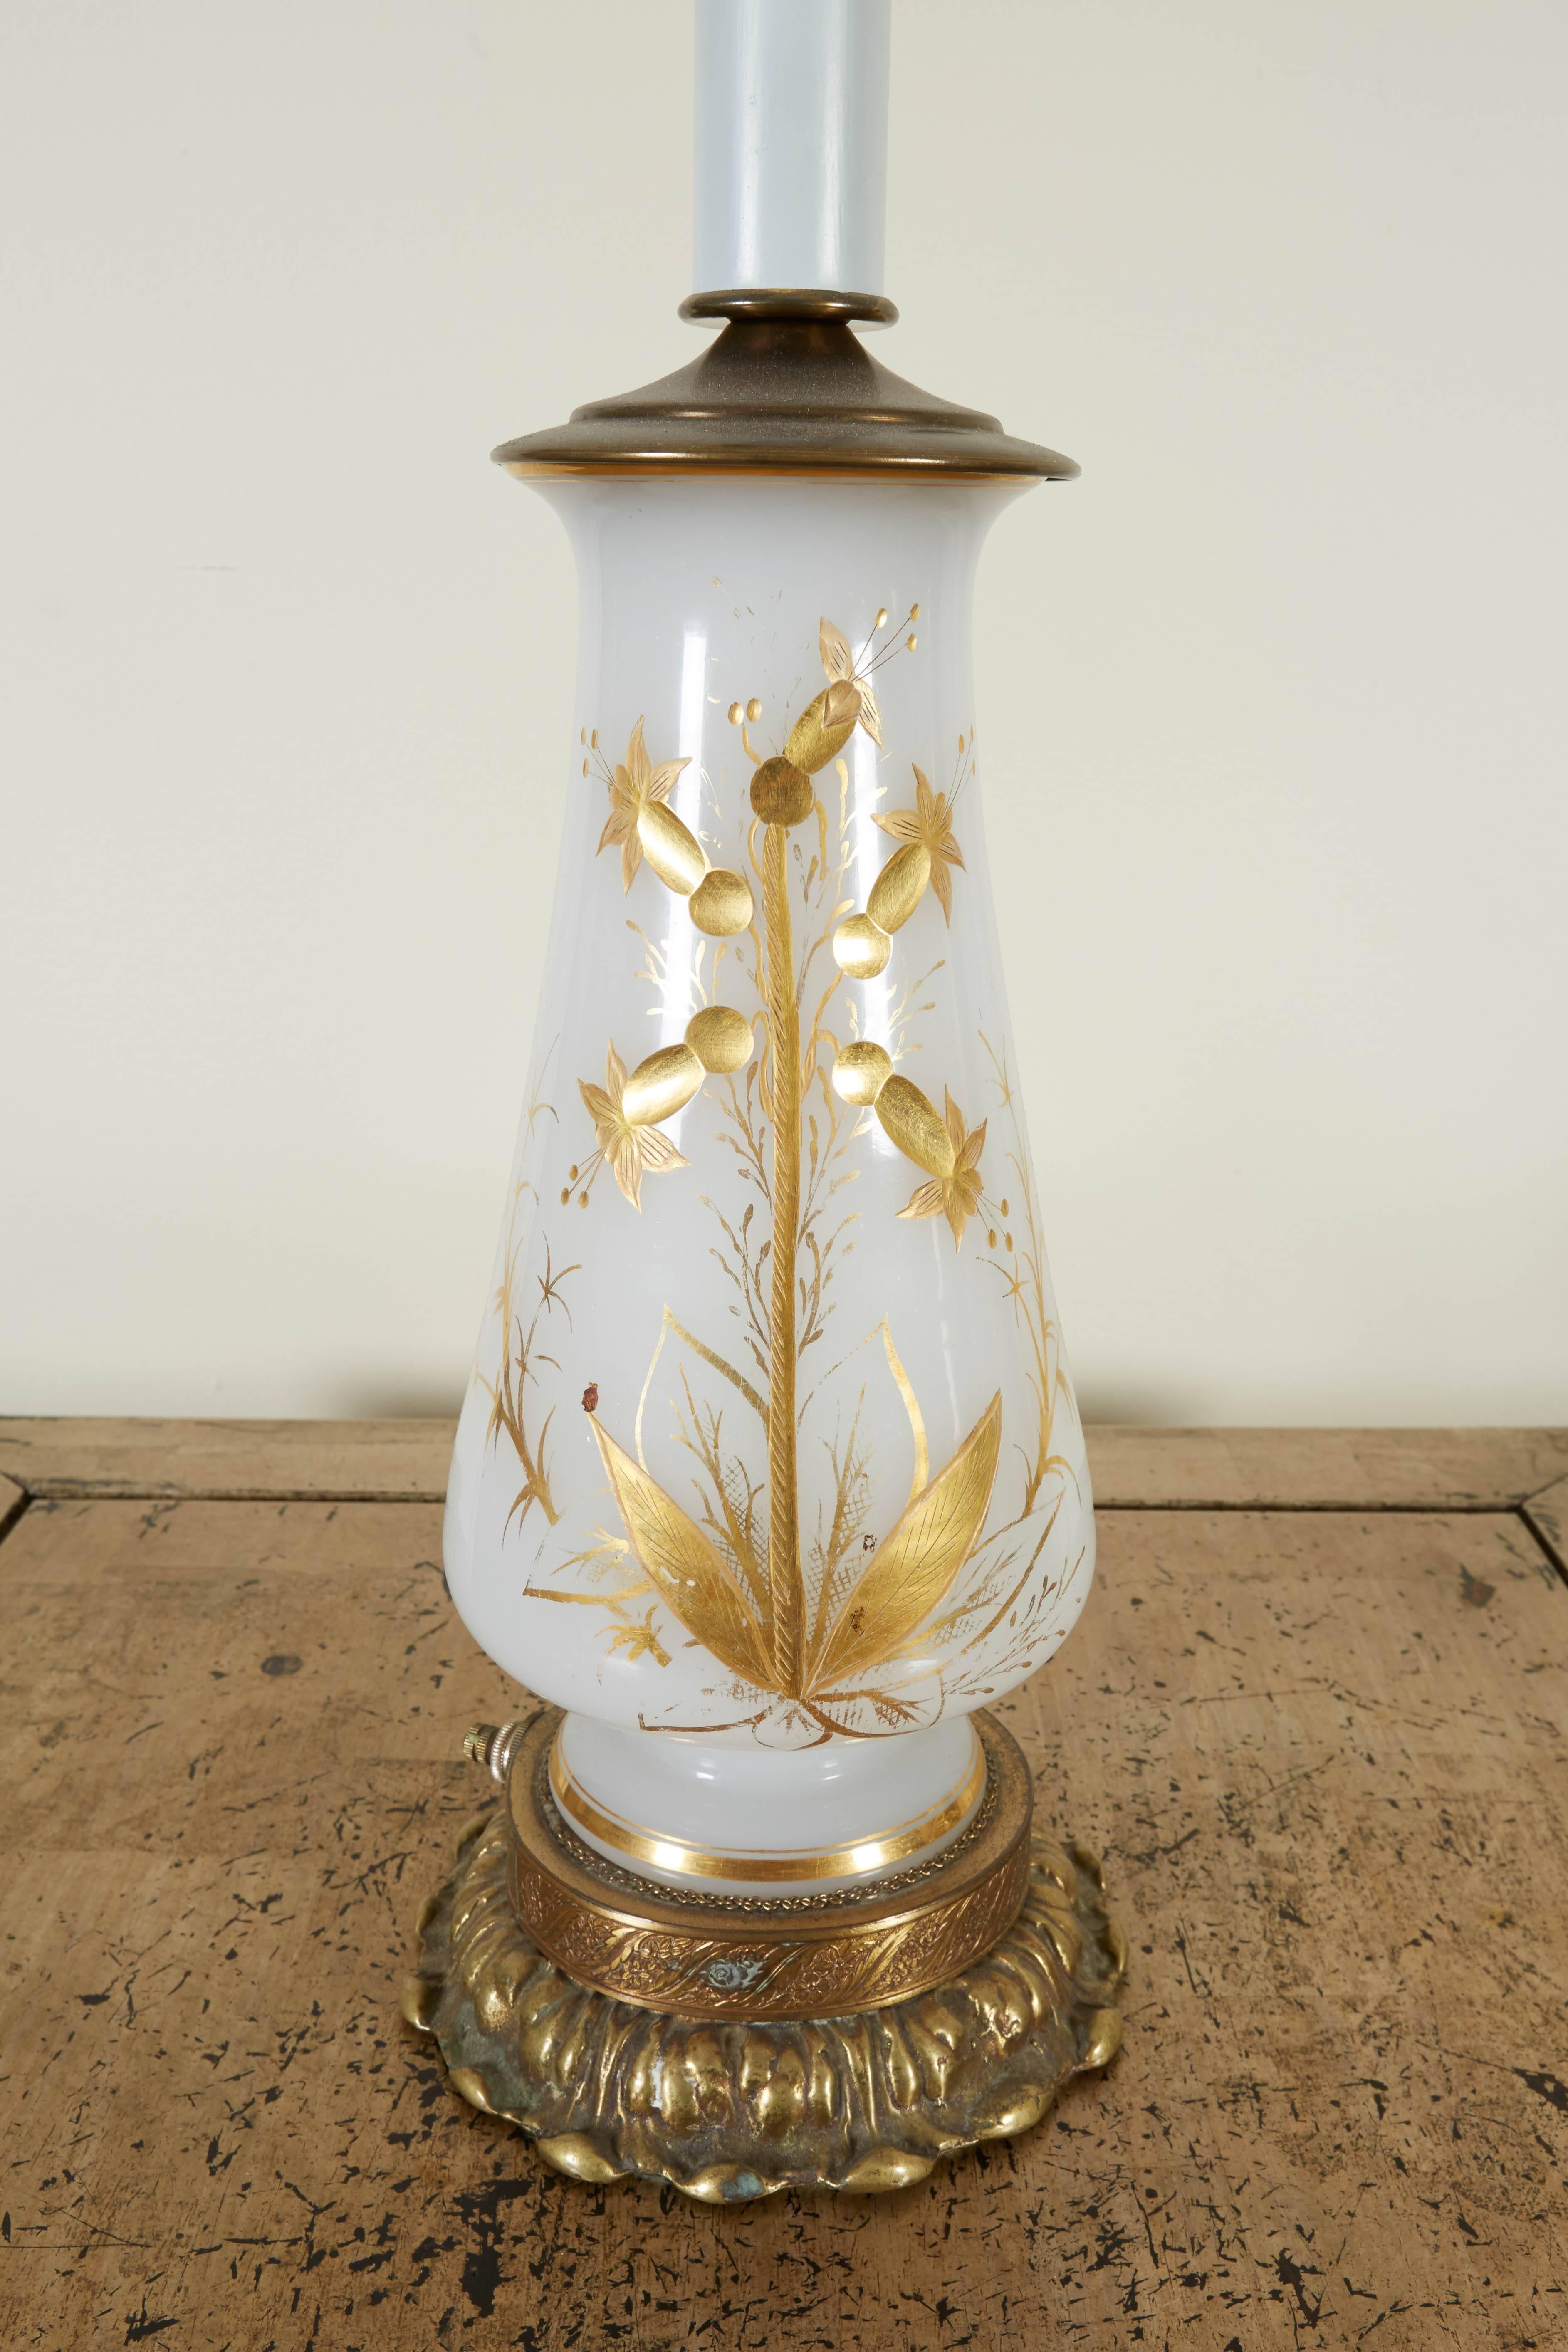 Each with vase hand-painted with a gilt floral spray mounted on a foliate gilt brass base. With removable harp surmounted by a flame finial. Height to top of vase is 12